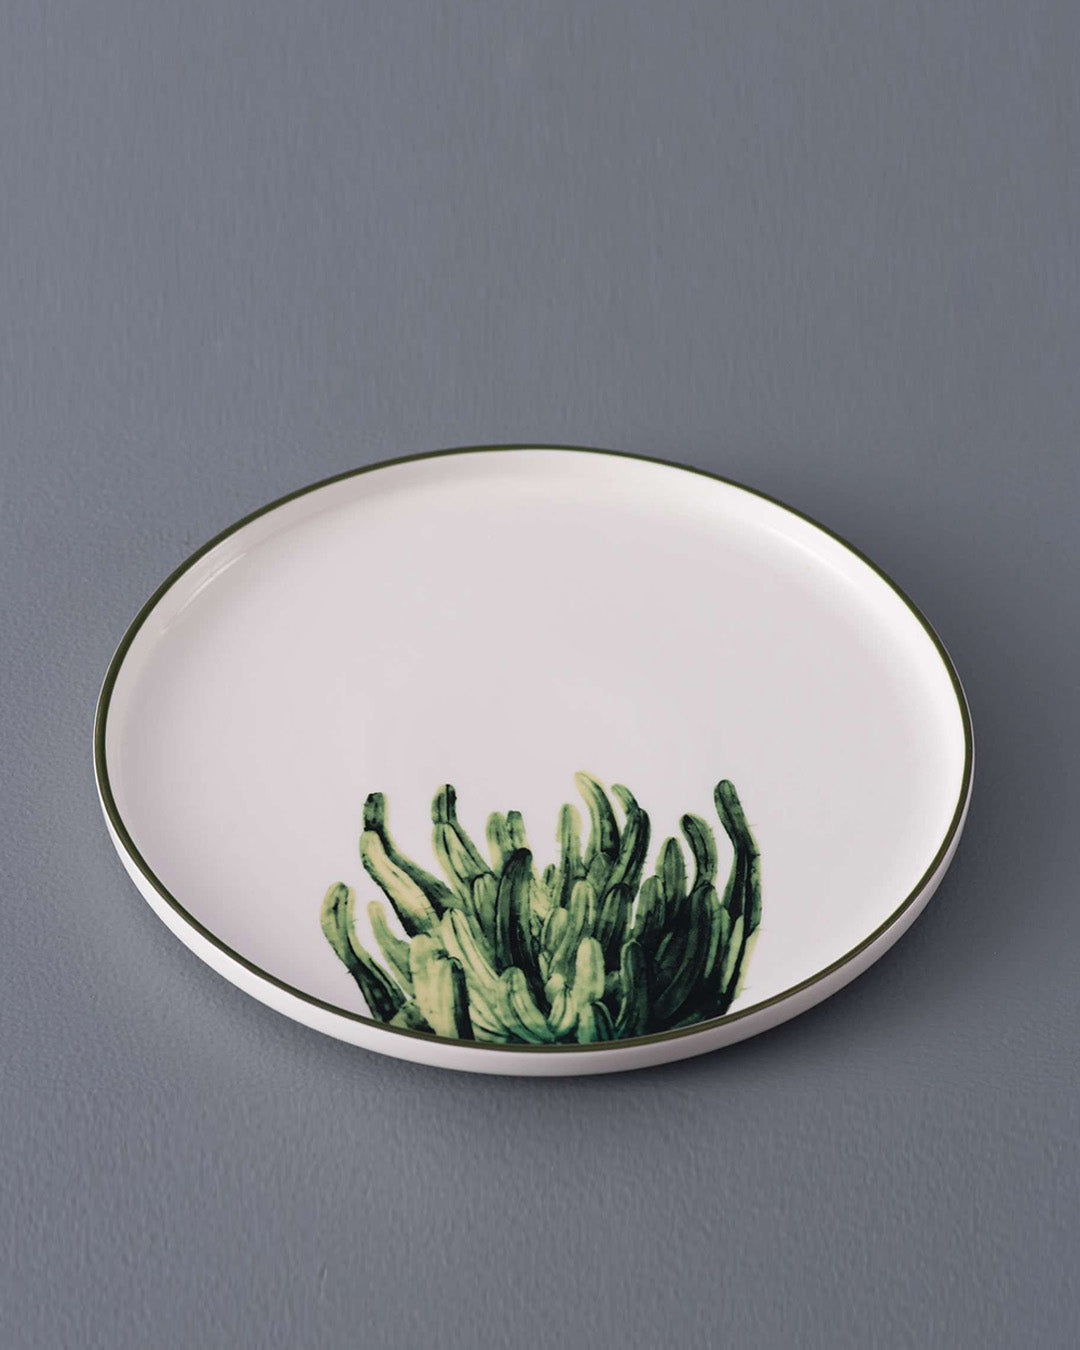 The Foliage - Green Outlined Dinner Plate